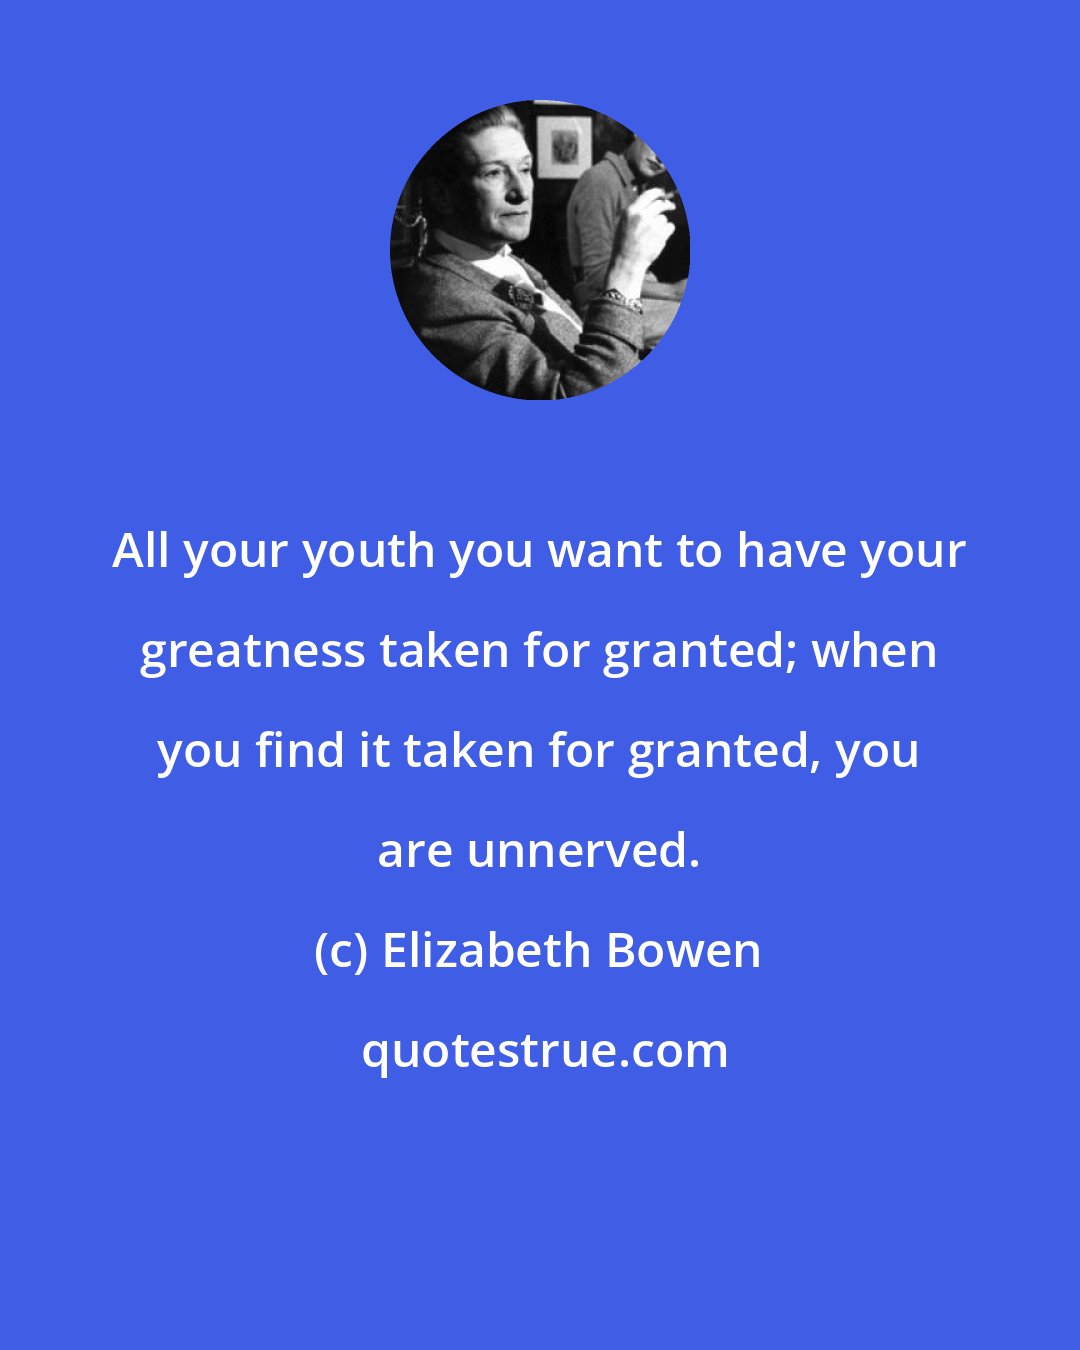 Elizabeth Bowen: All your youth you want to have your greatness taken for granted; when you find it taken for granted, you are unnerved.